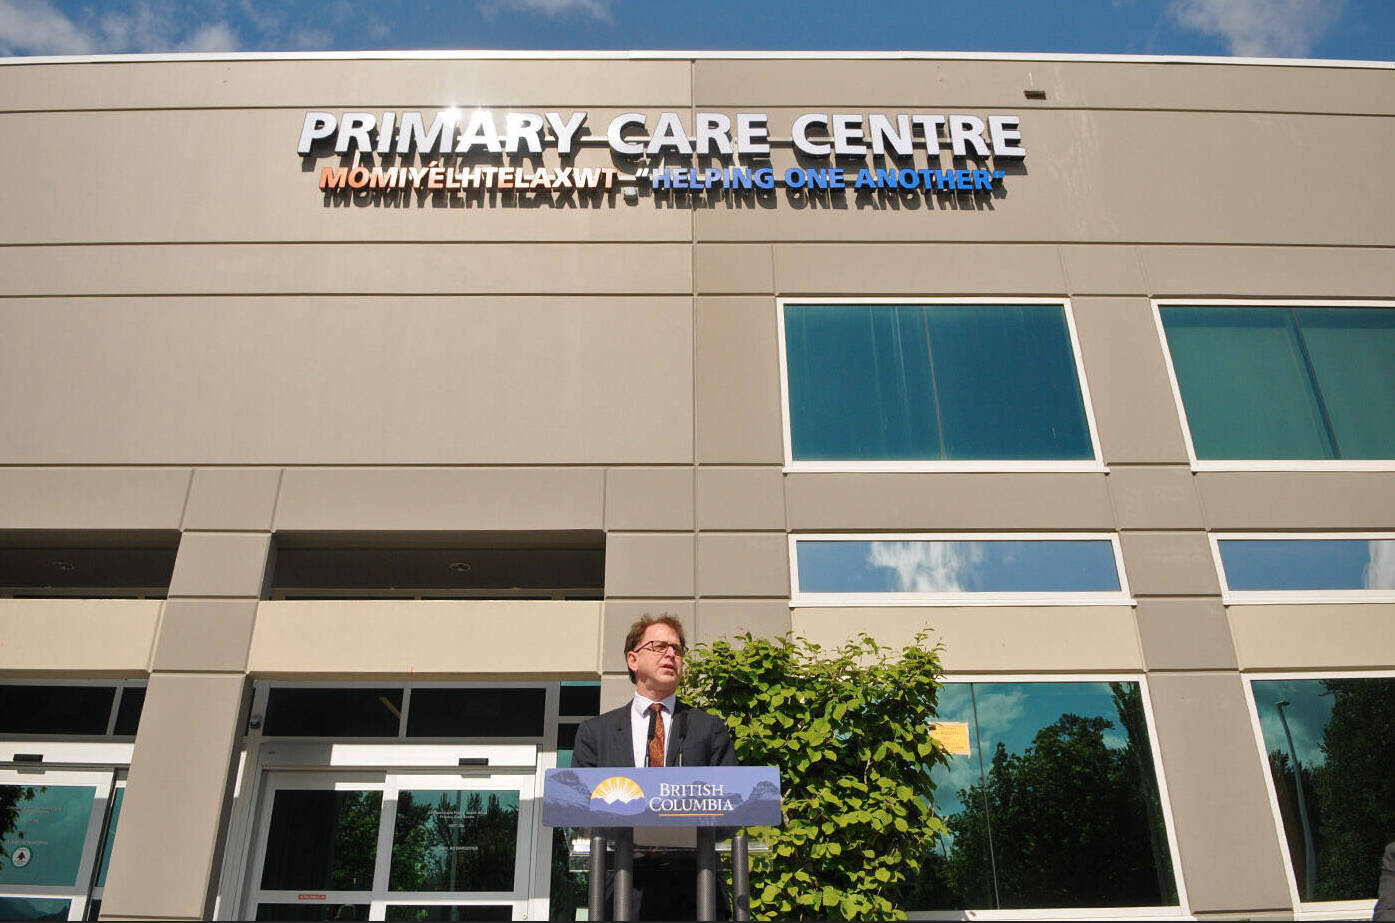 B.C. Health Minister Adrian Dix speaking at the May 13, 2022 opening of the new Primary Care Centre in Chilliwack. (Jenna Hauck/ Chilliwack Progress)